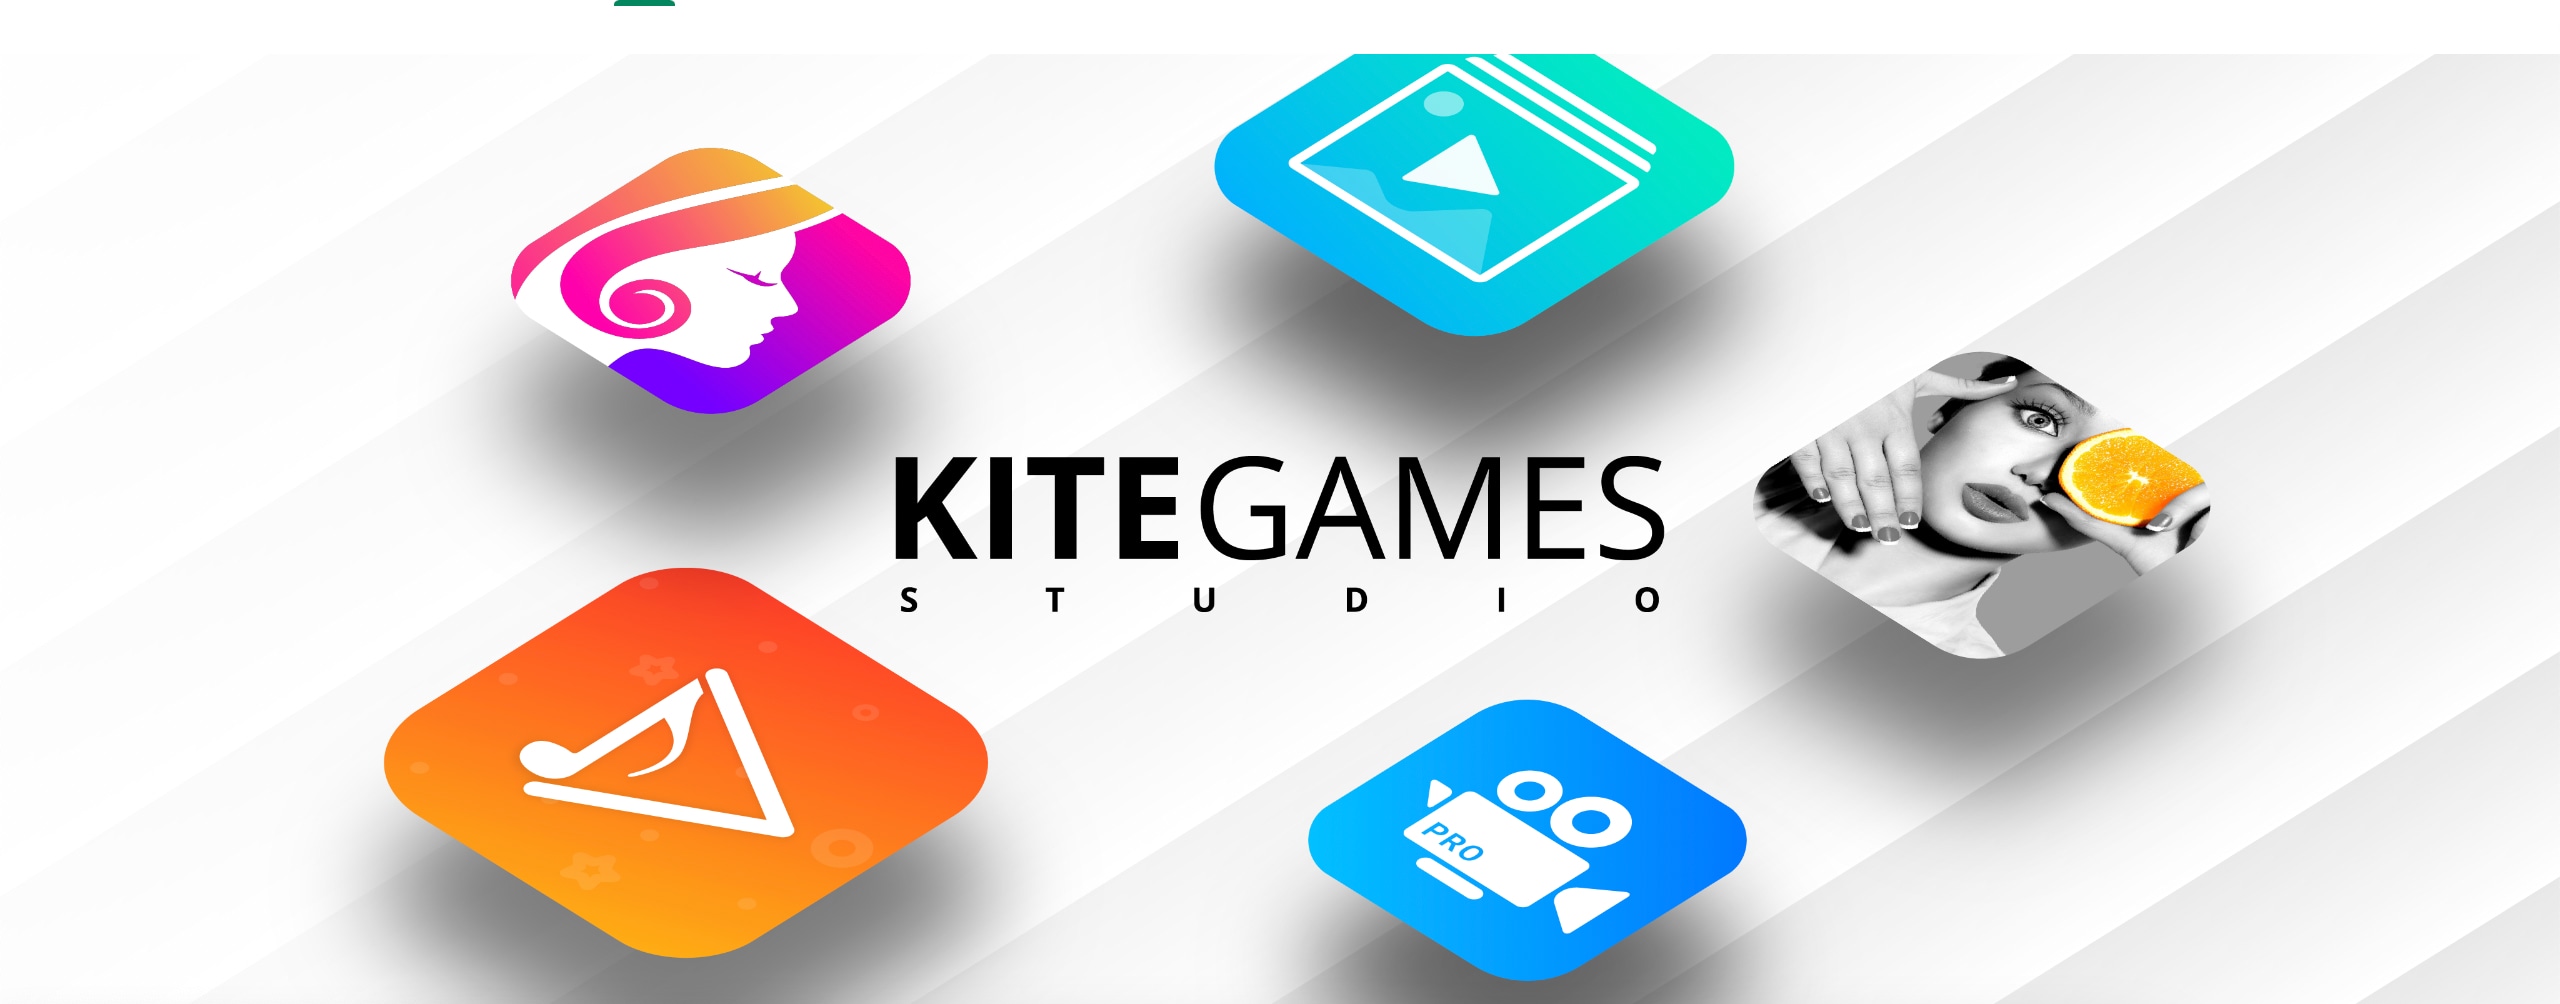 kite games image editing apps